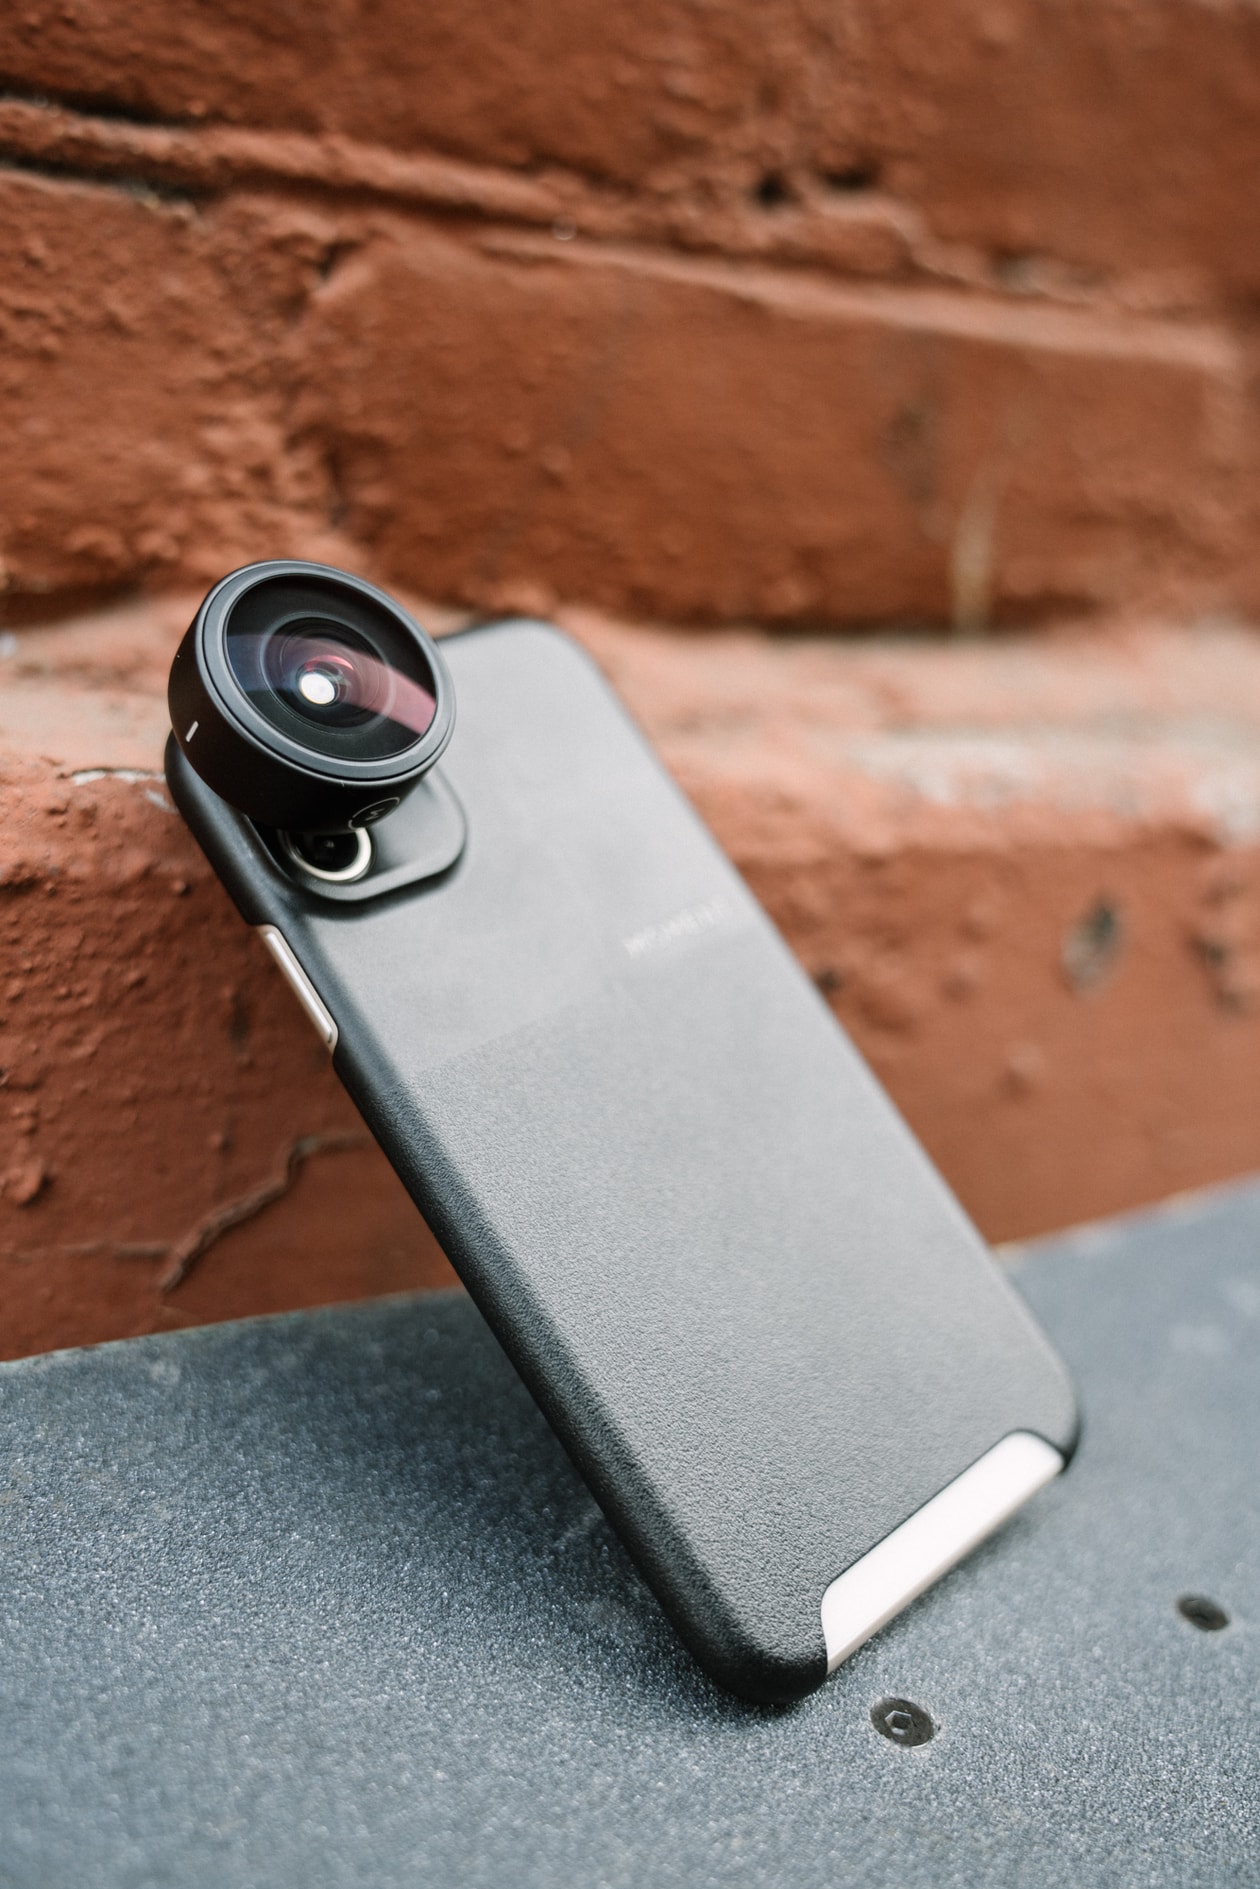 Moment Introduces Its New 14mm Fisheye Lens